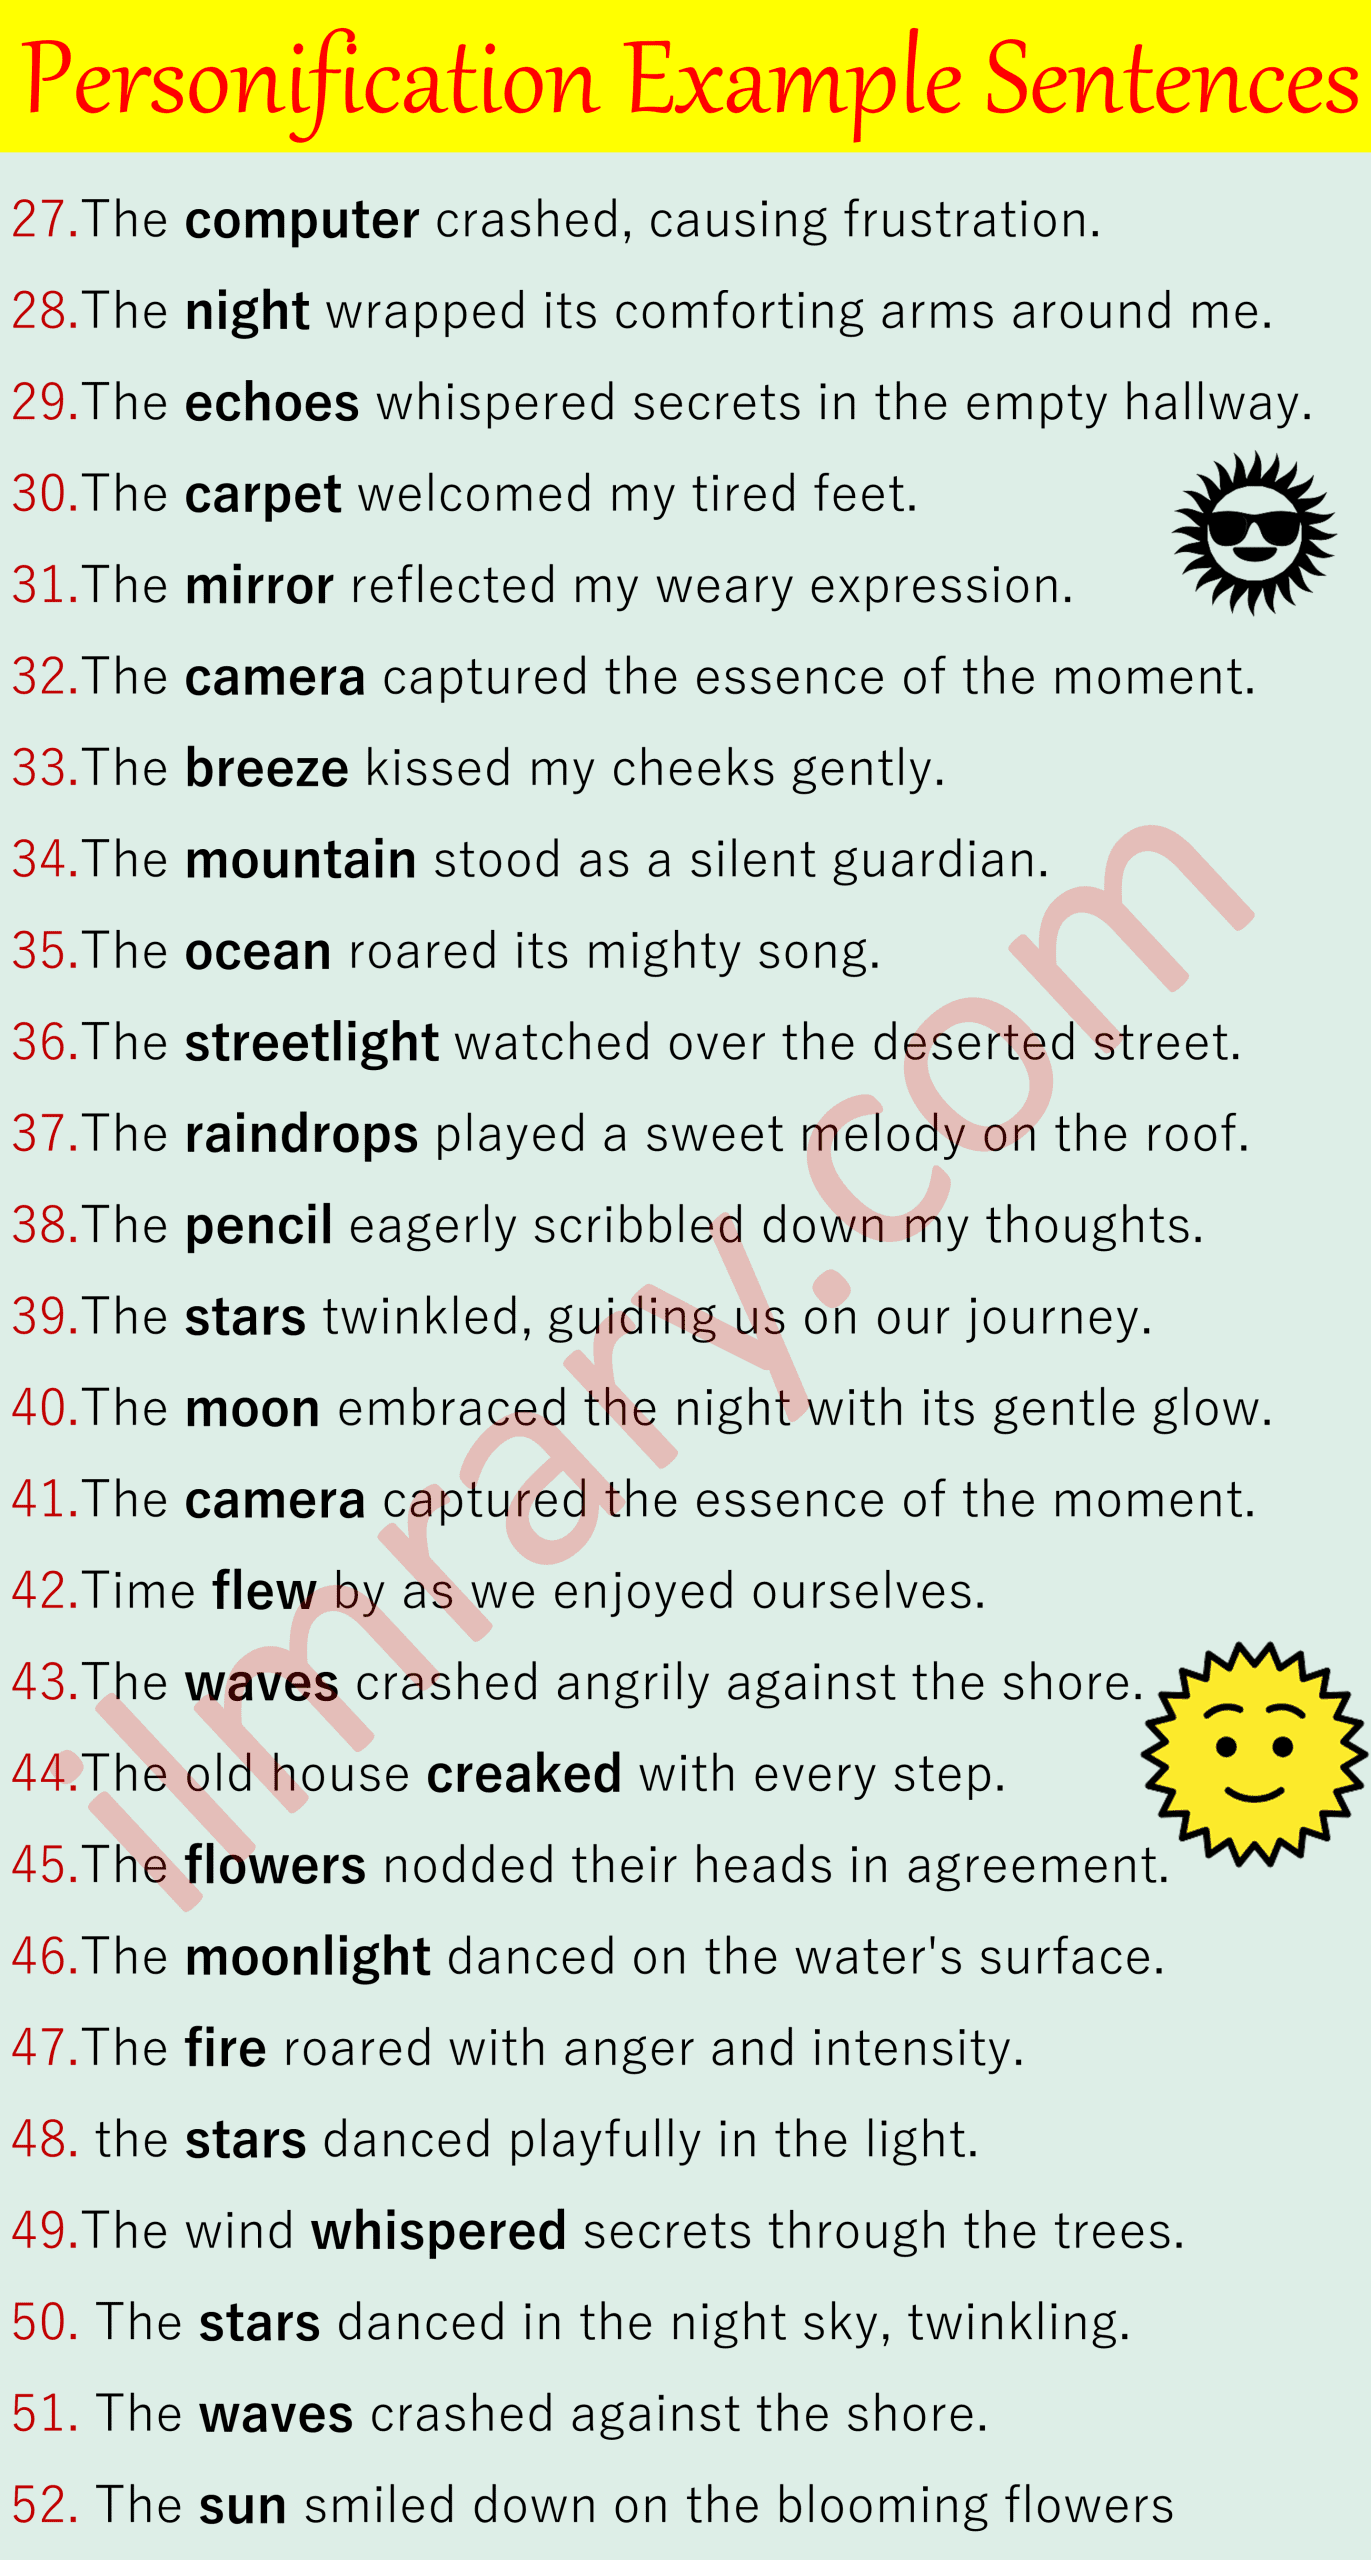 50 Example Sentences of Personification in English